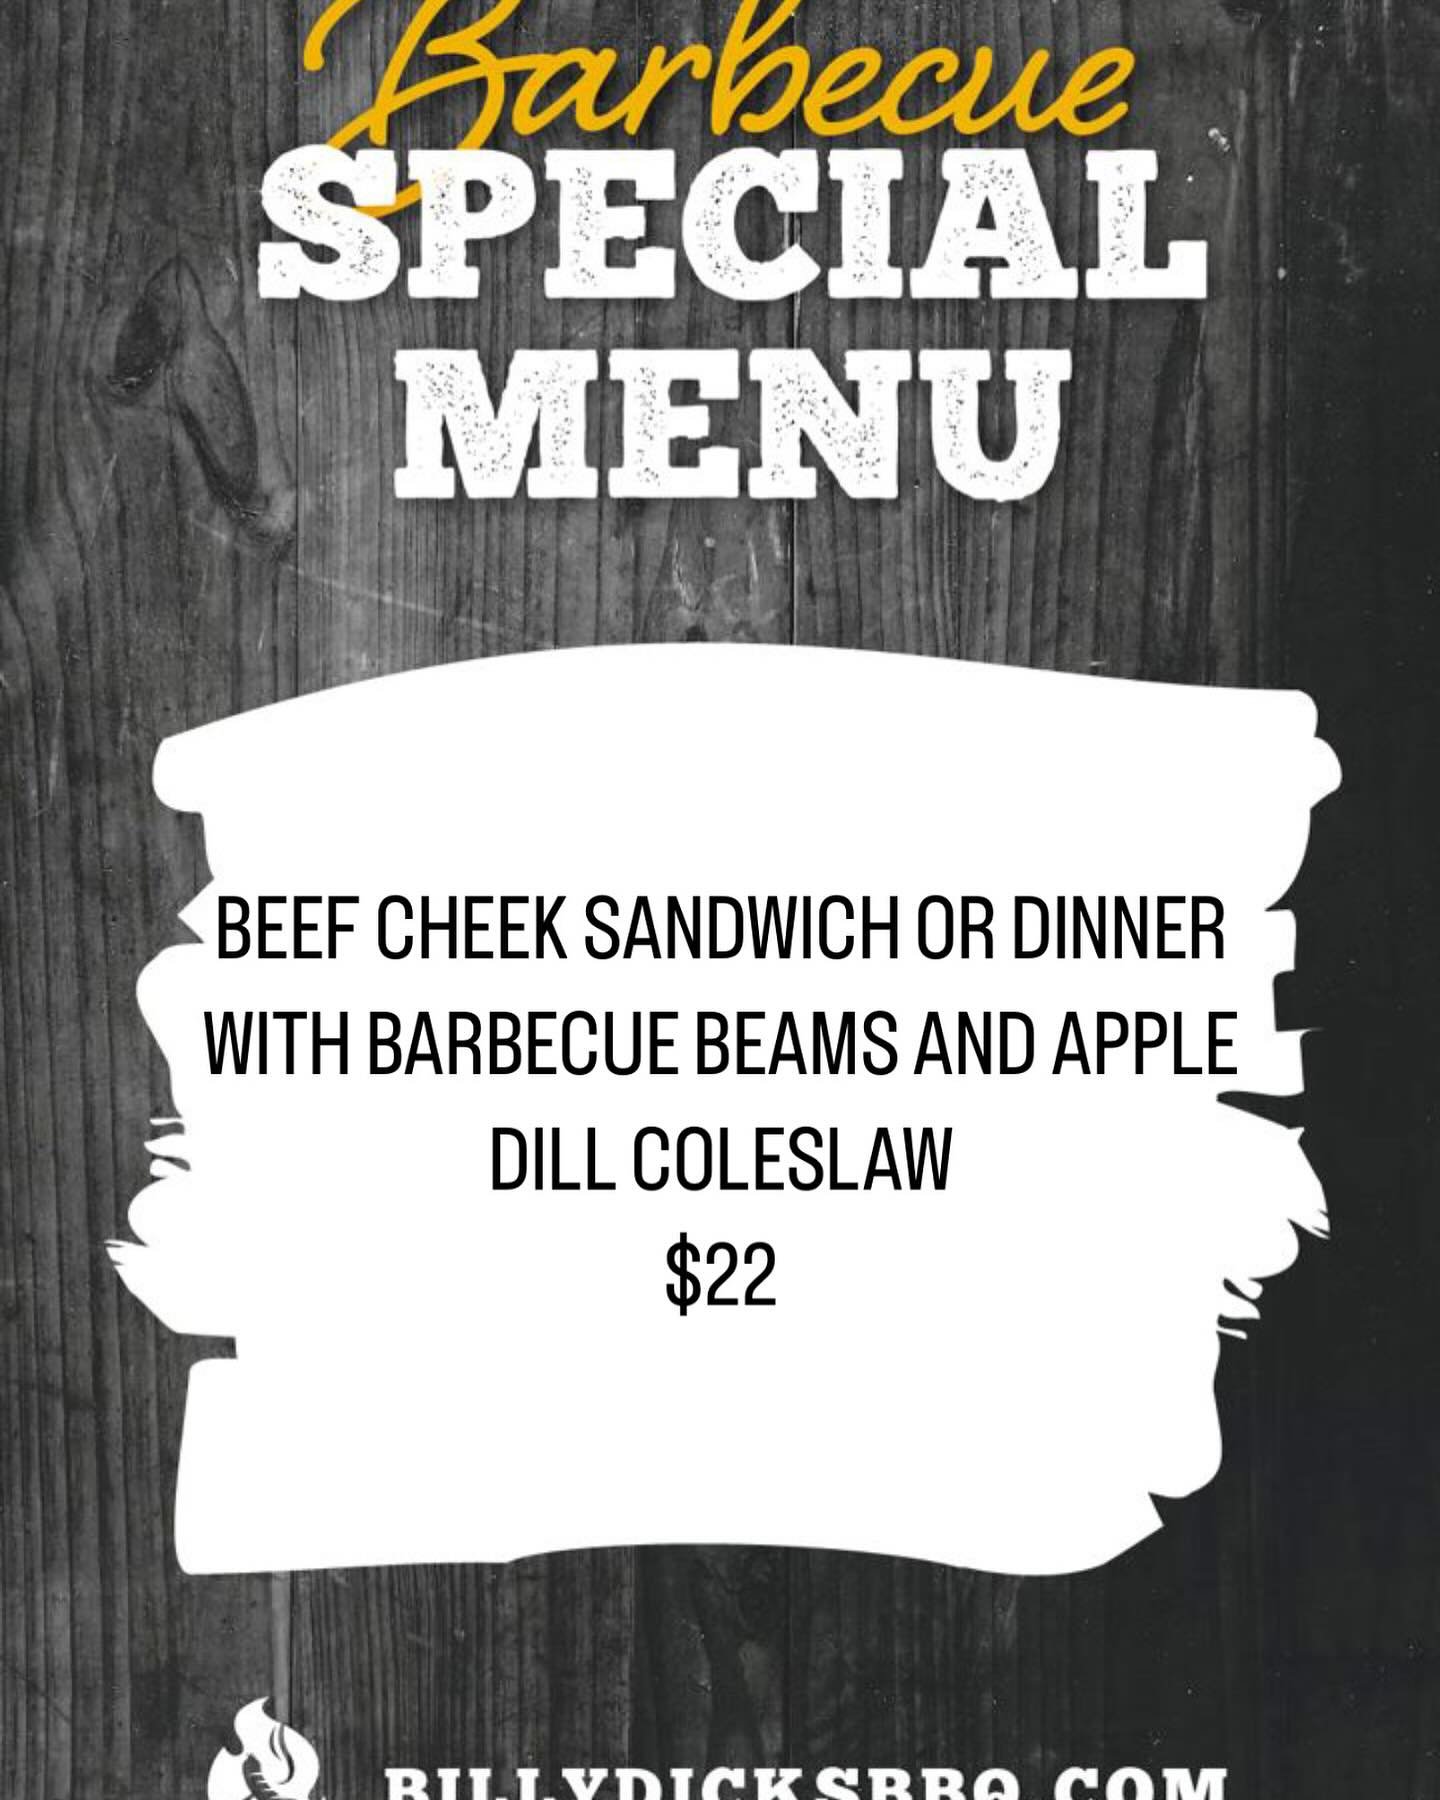 Things are Cheeky around here today, so hurry in and treat yourself to a unique meal.  Beef Cheeks for the win!!!! #barriebbq #barrieontario #allistonontario #bluemountains #collingwood #collingwoodontario #gtabbq #gta #muskokabbq #muskokabarbecue #b